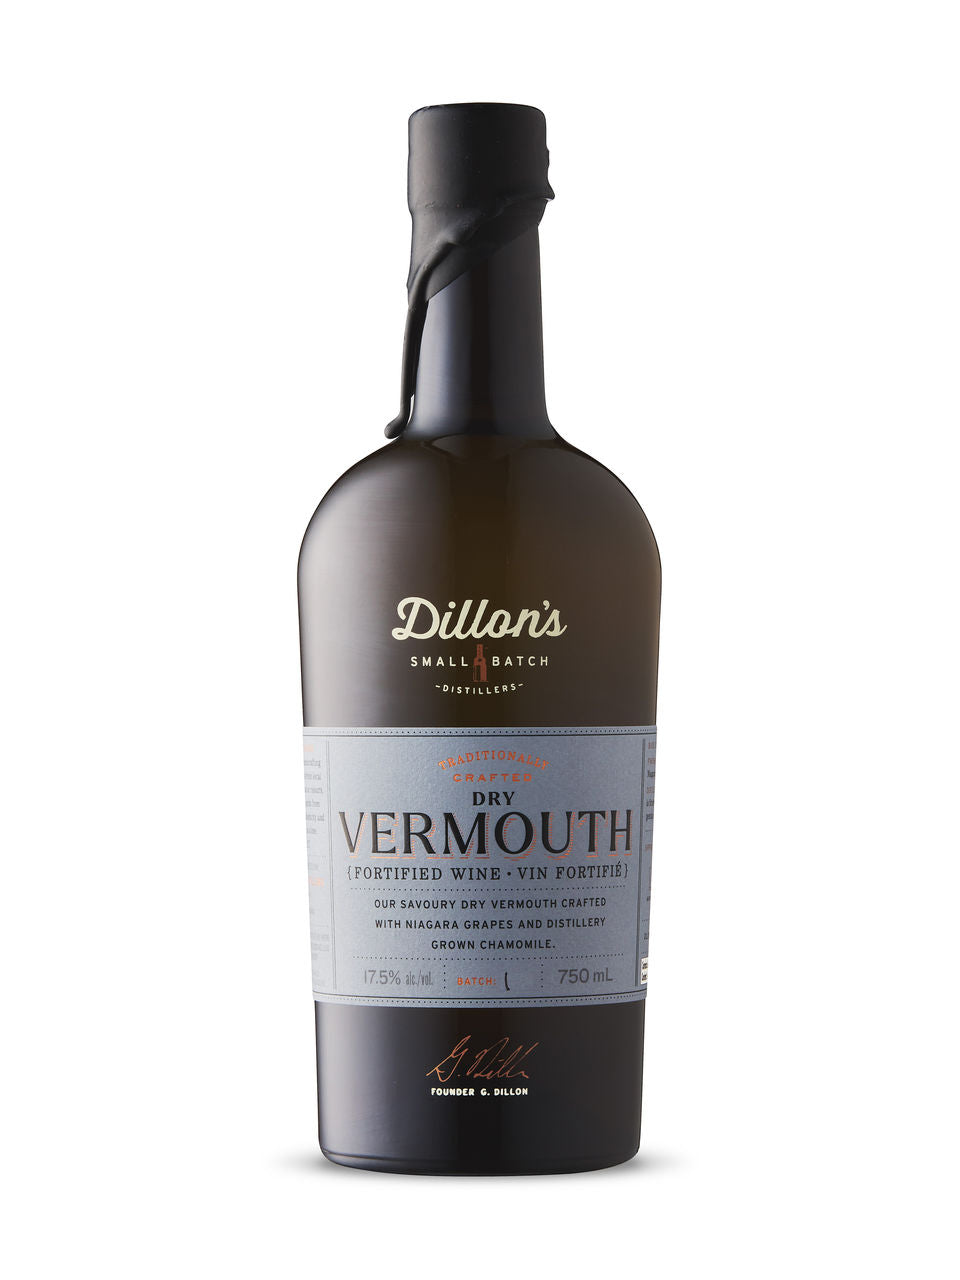 Dillon's Small Batch Dry Vermouth 750 ml bottle VINTAGES